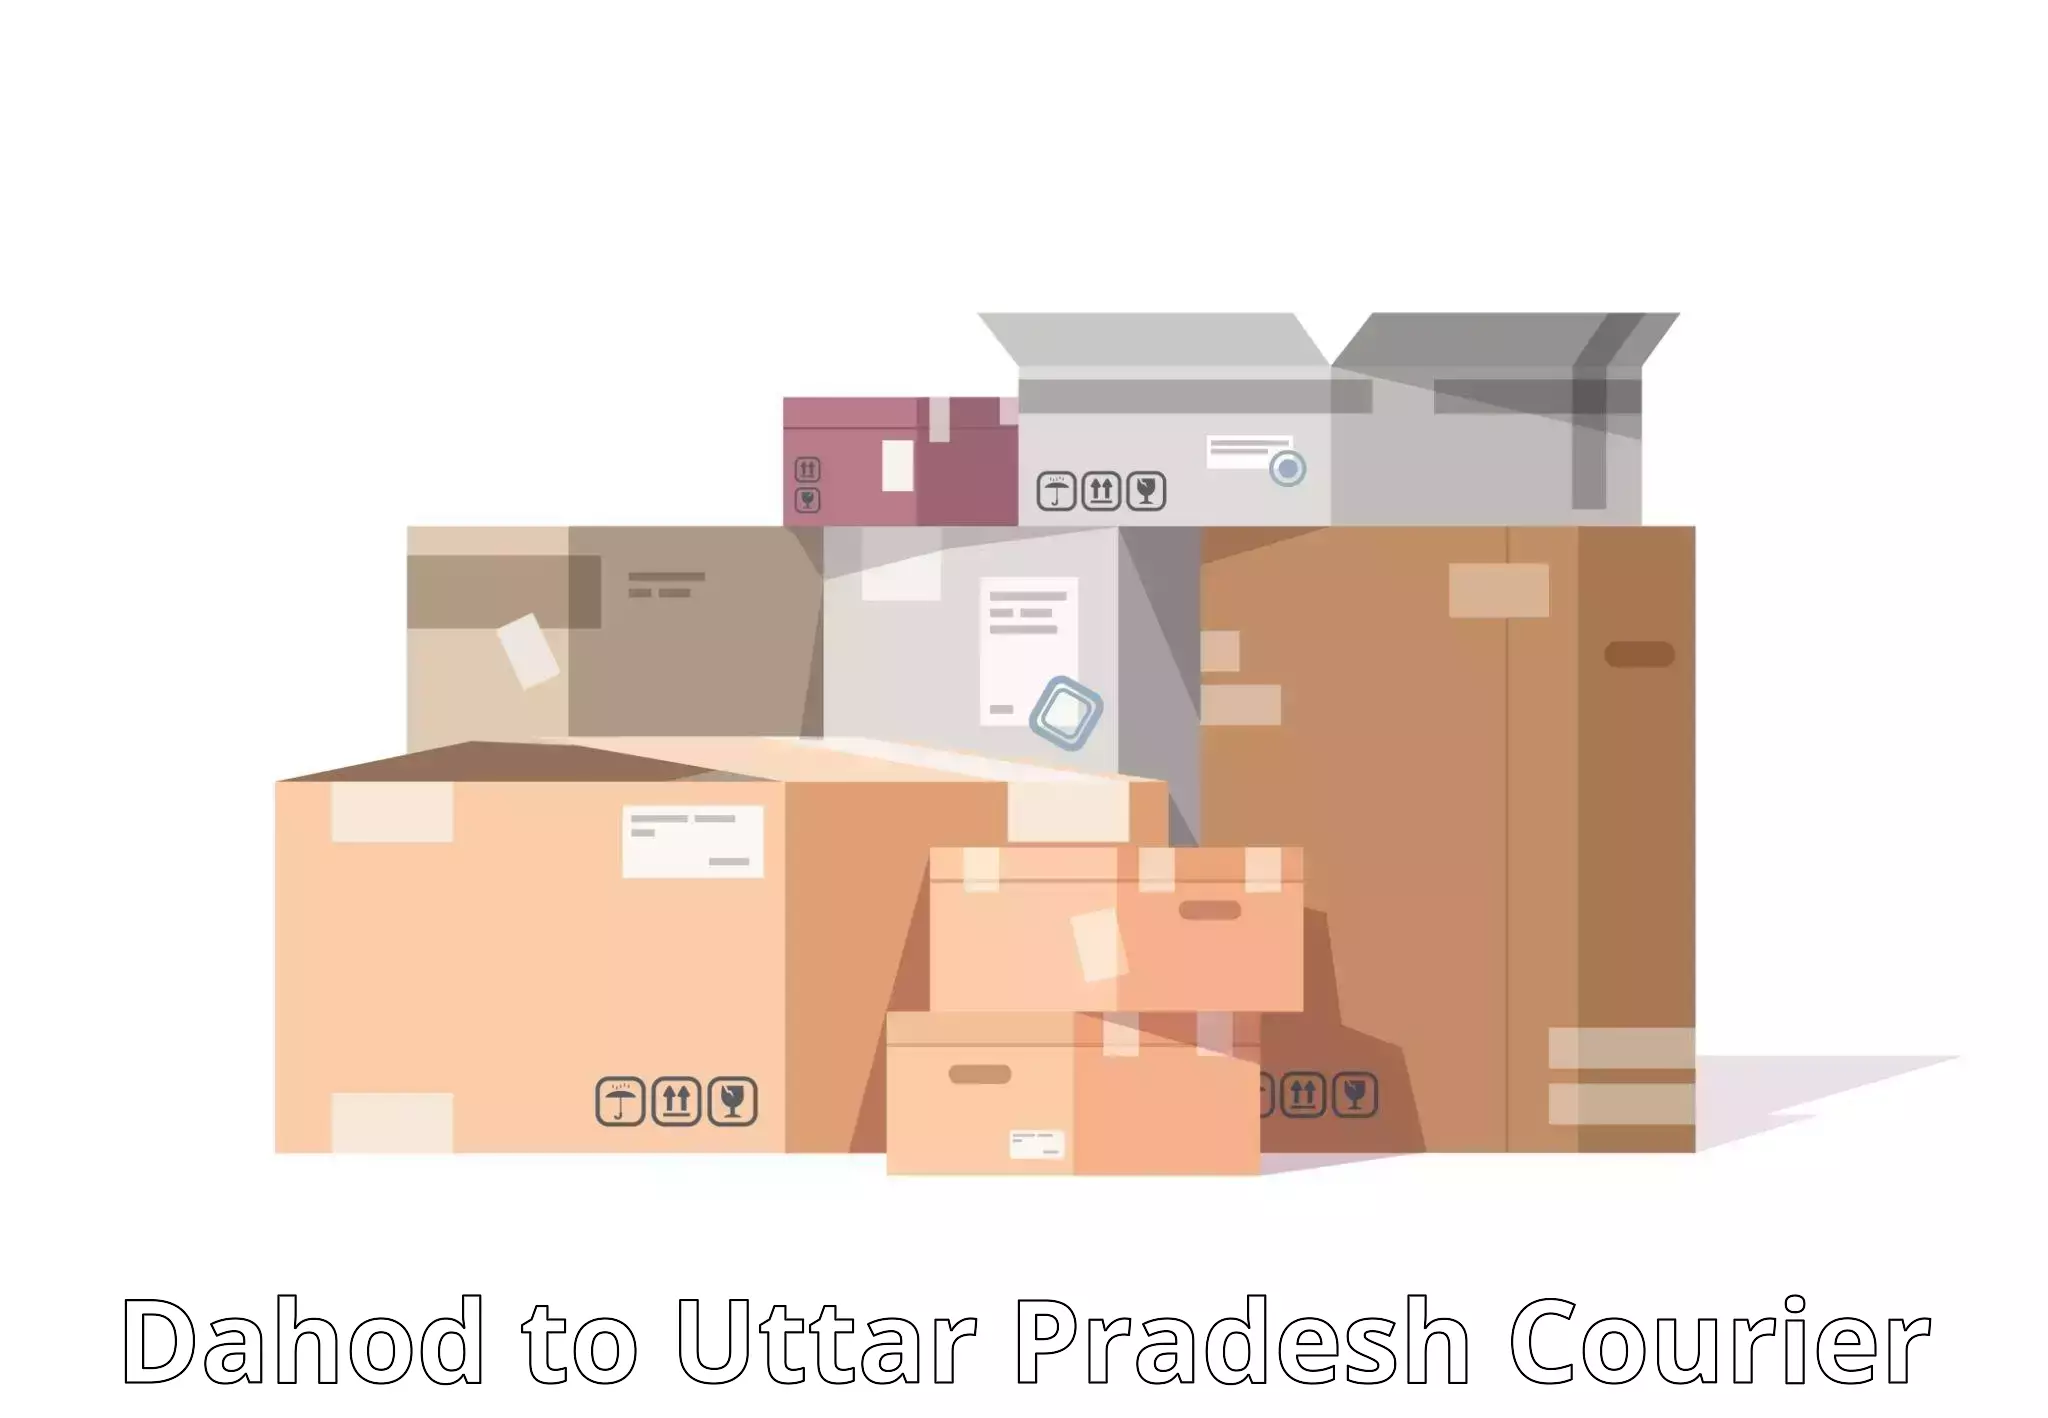 Courier service efficiency Dahod to Dhaurahara